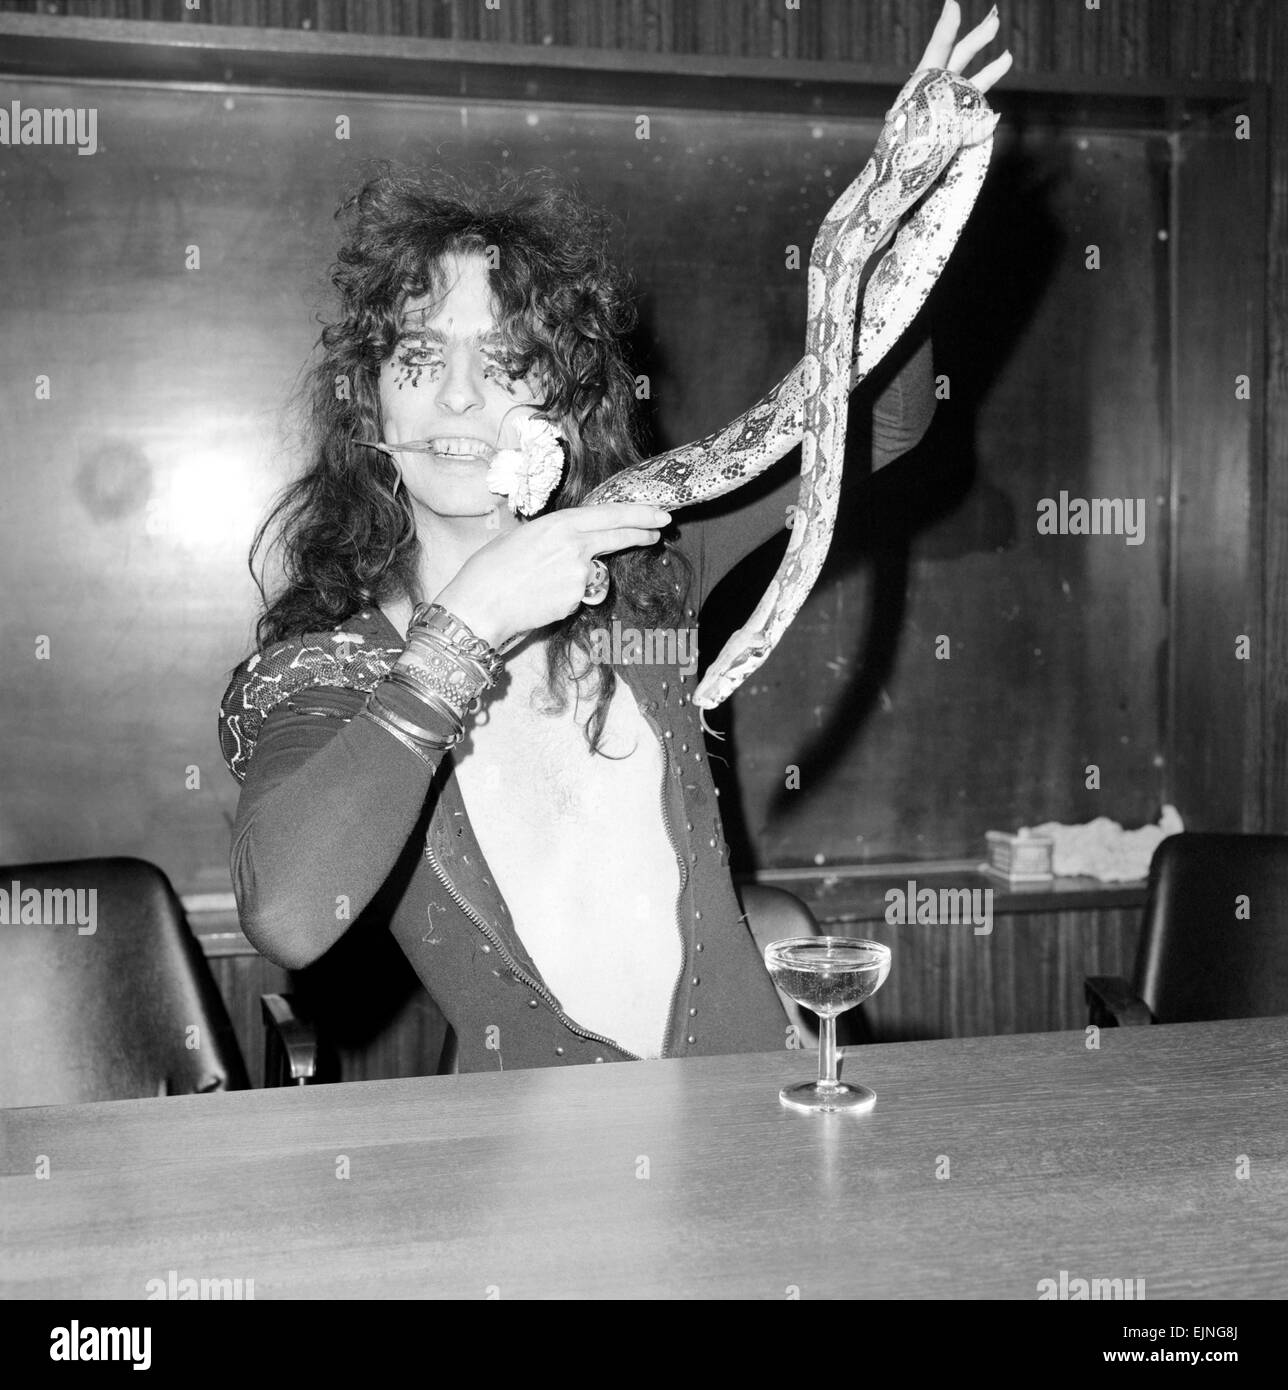 Pop singer Alice Cooper aged 23 flew into Heathrow Airport today with his pet boa constrictor, wearing a flimsy see-through shirt with no buttons. He calls his python Rachina and allowed it to slide over his face and neck. Alice Cooper flew in from the United States and will be appearing in Britain. He is staying in London. October 1971. Stock Photo